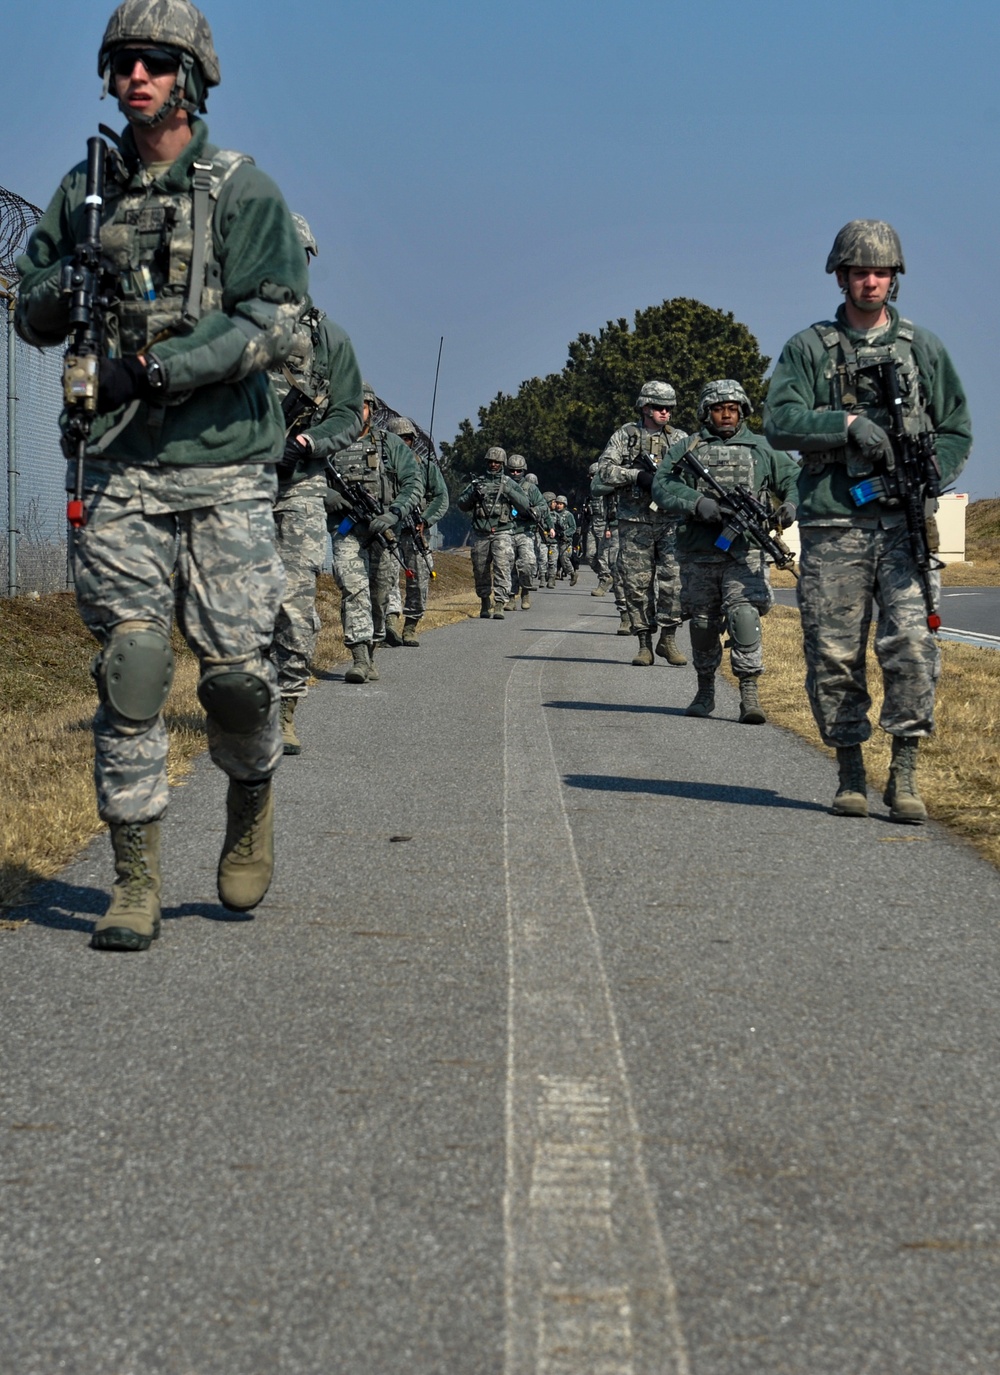 8th Security Forces train to defend the base